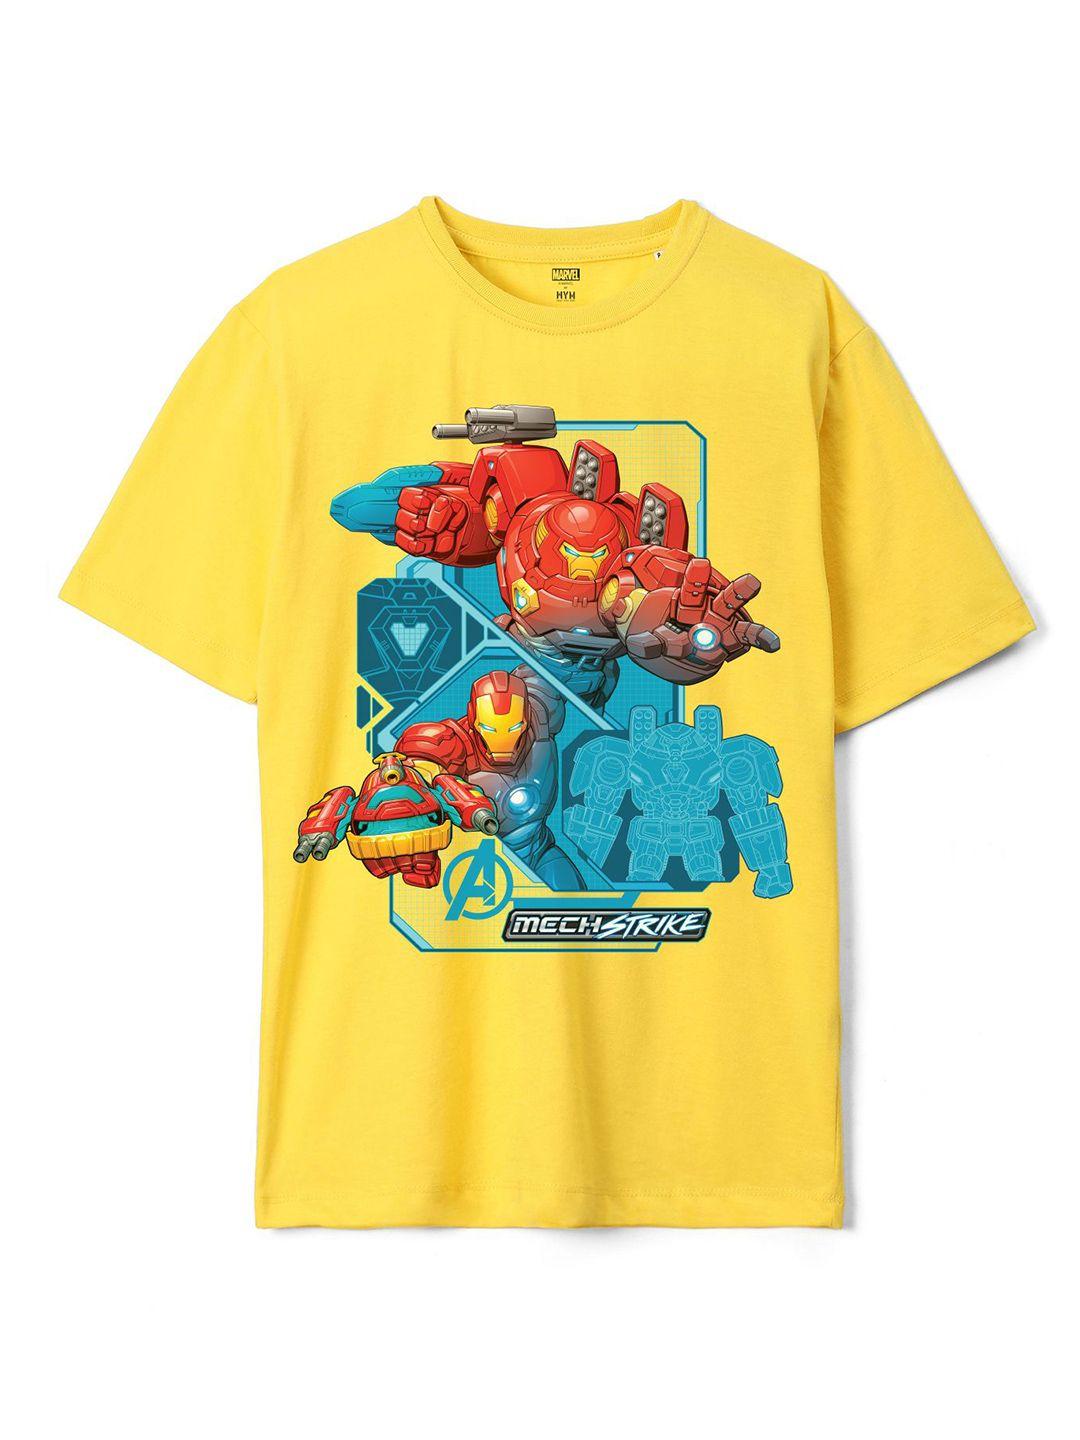 wear your mind boys iron man graphic printed loose cotton t-shirt